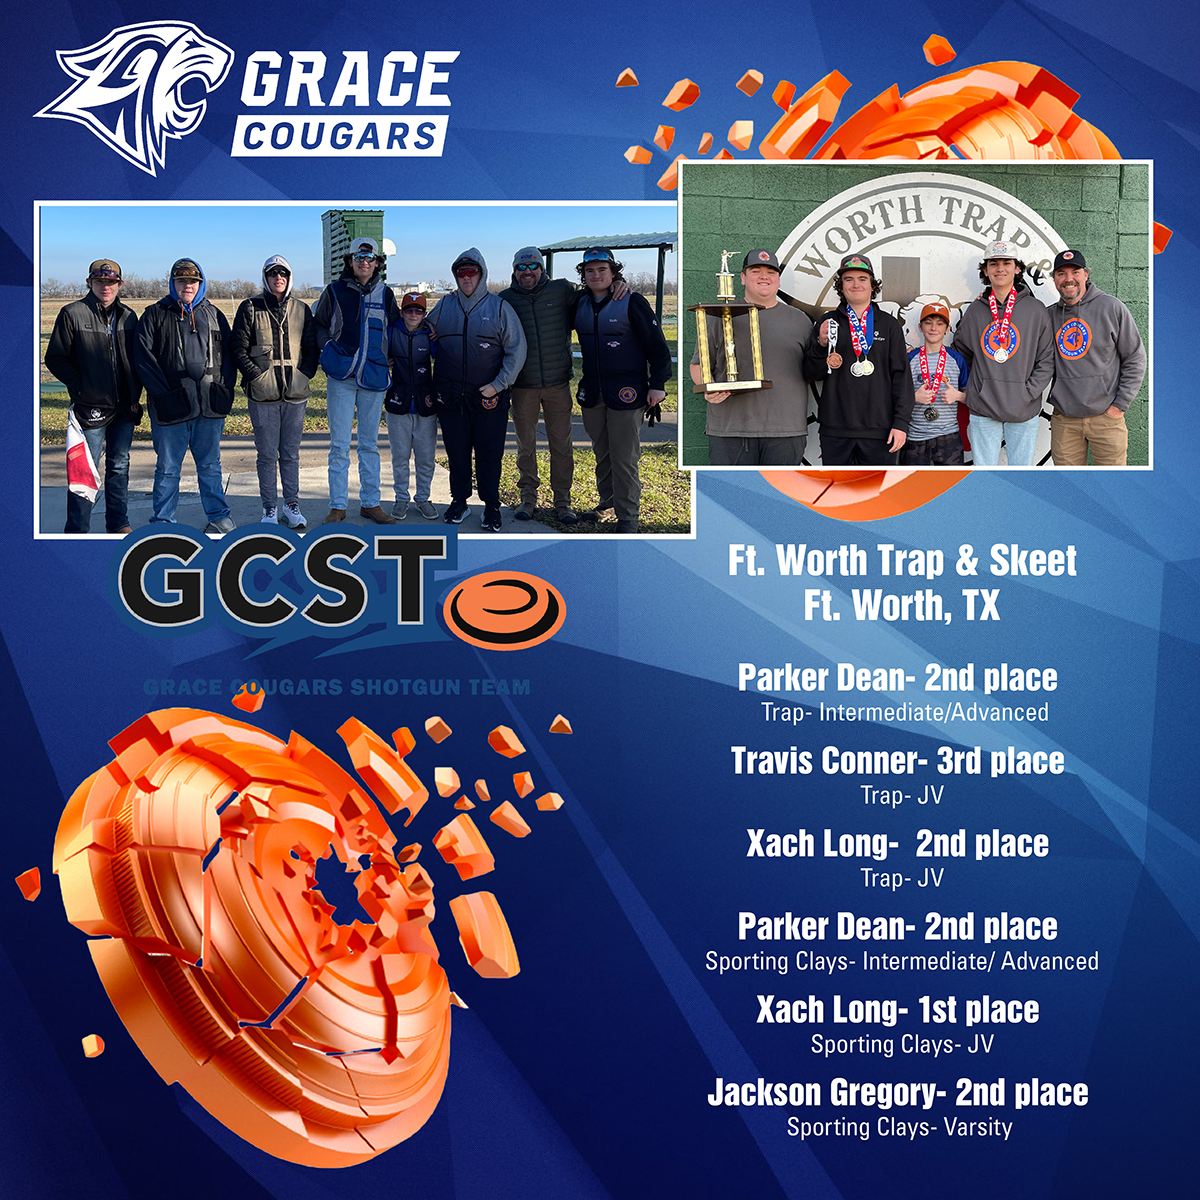 Congratulations to our GCS Shotgun team for their fantastic results at this week's competition in Ft. Worth!

#WeLoveGCS #TeachingJesus #Grace #PrivateSchool #AcademicExcellence #ChristianSchool #TylerTexas #ShotgunTeam